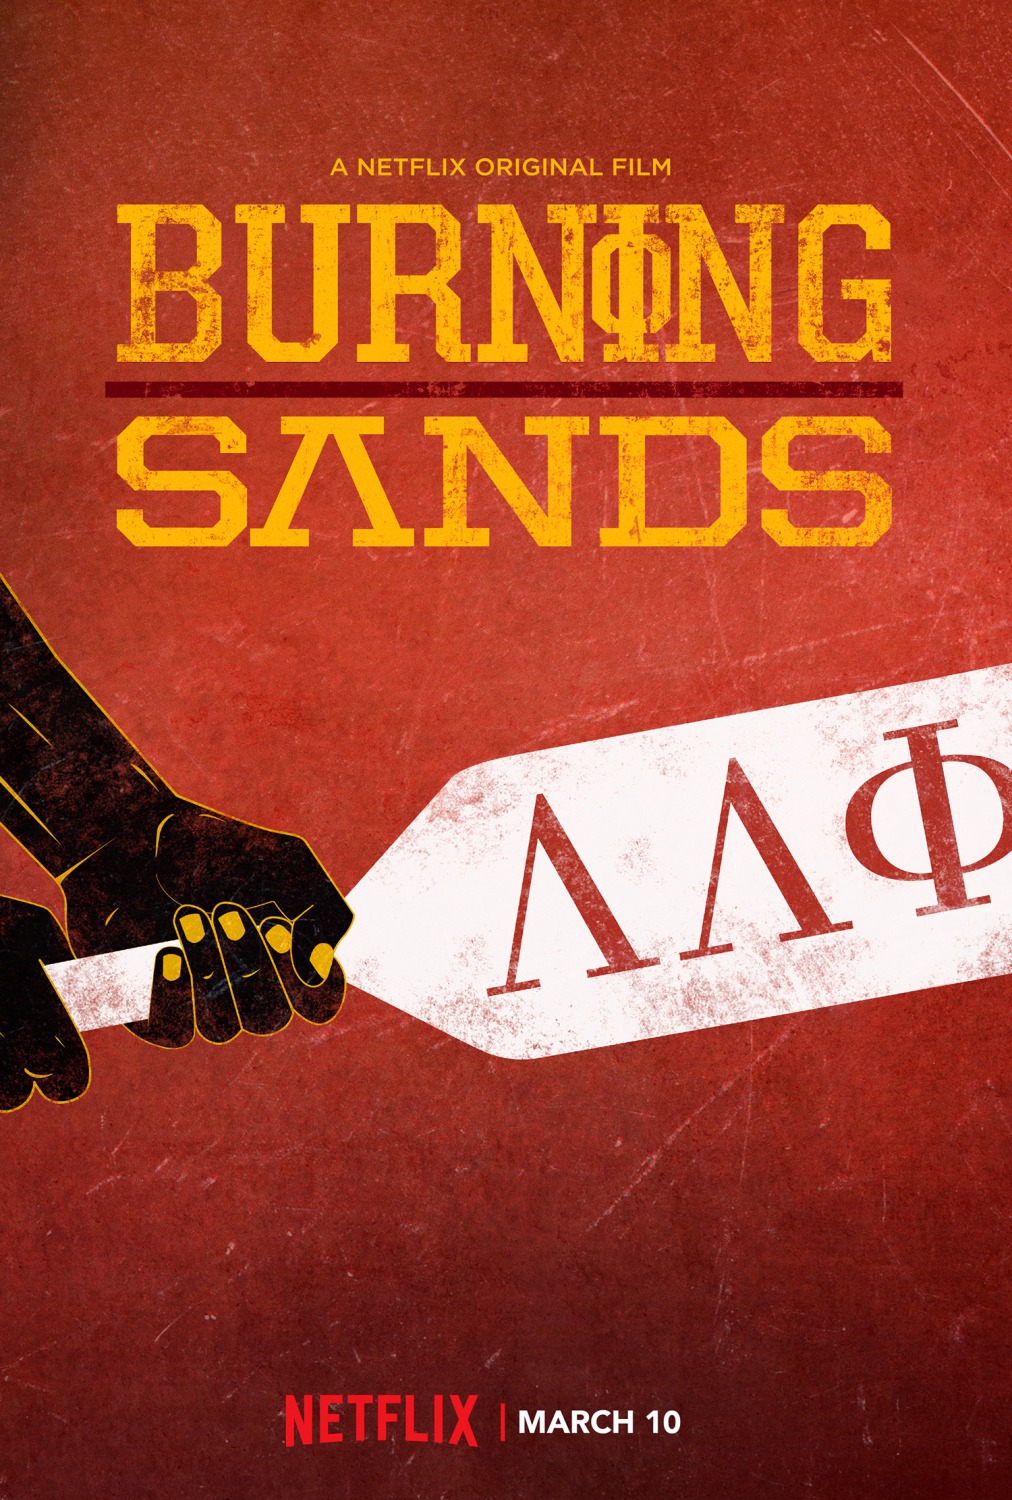 Extra Large TV Poster Image for Burning Sands 